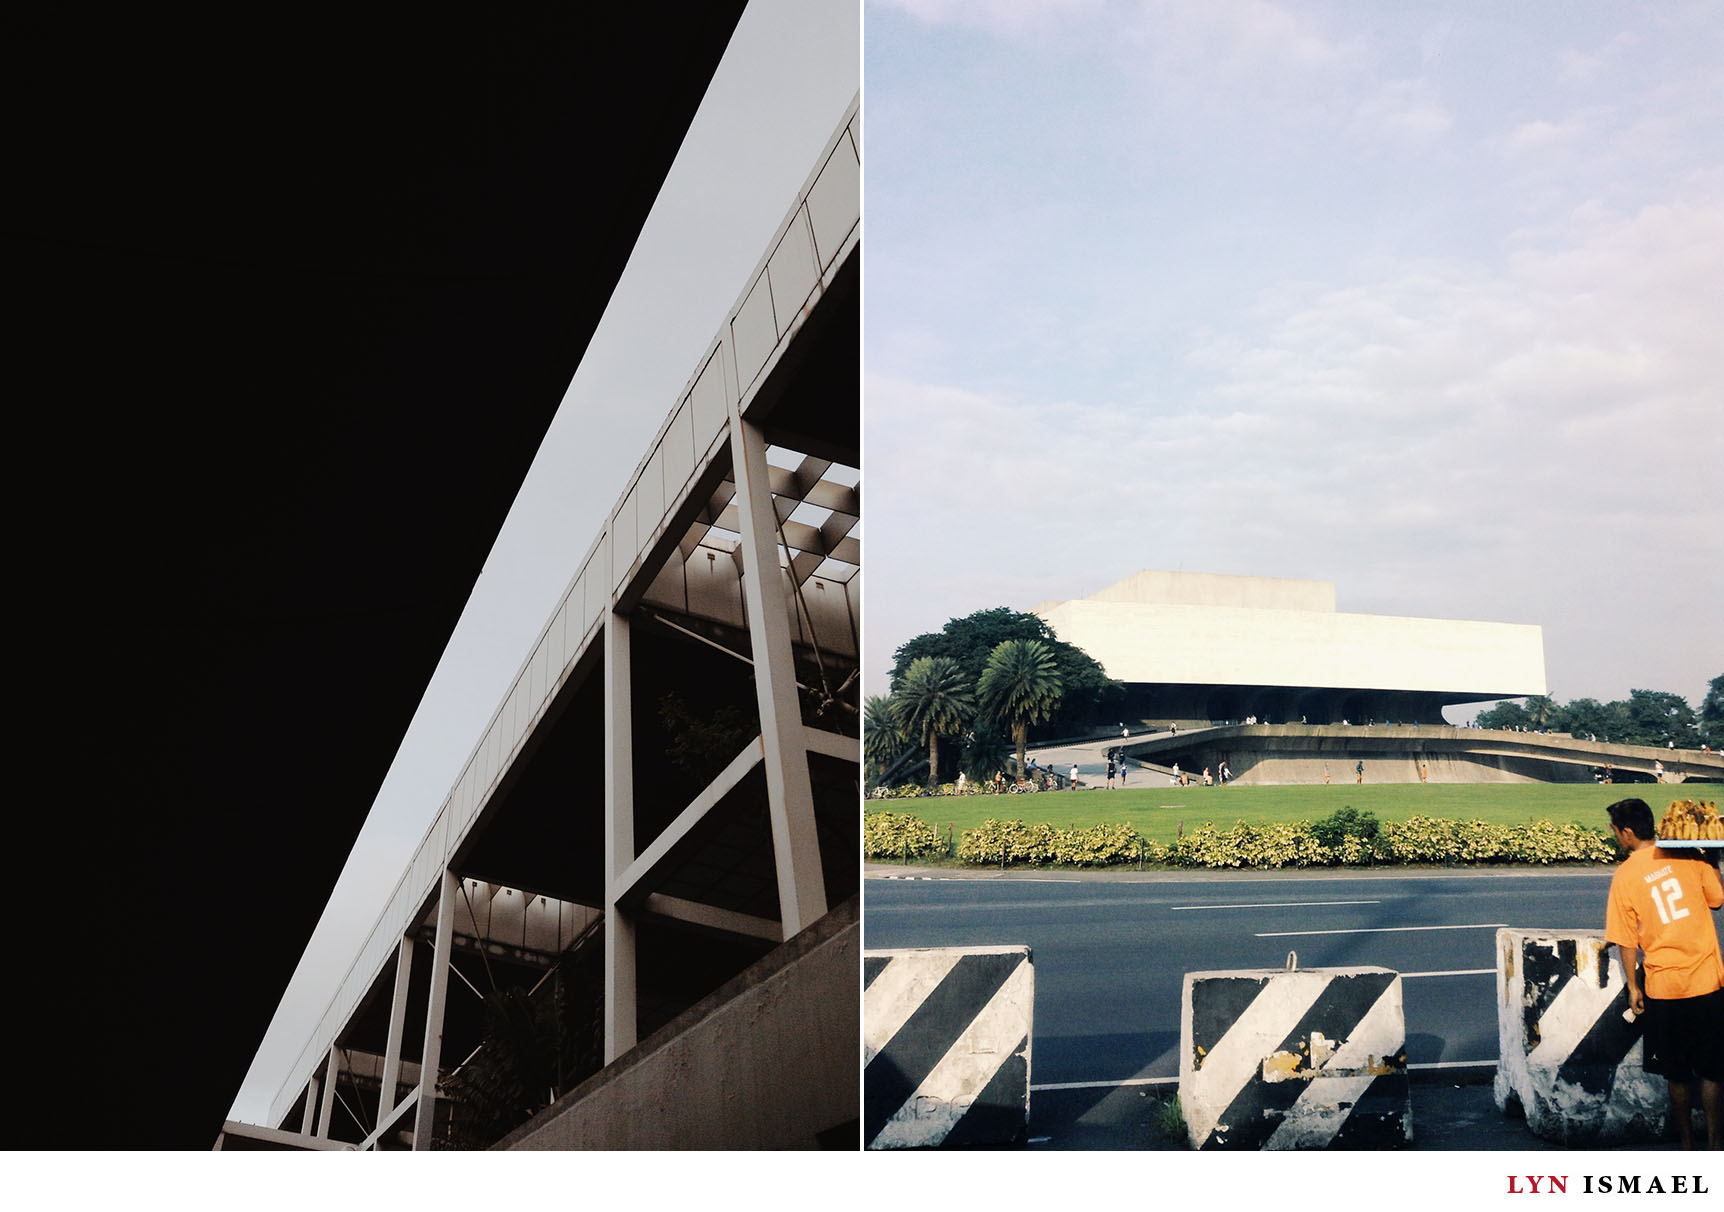 NAIA and cultural center of the Philippines